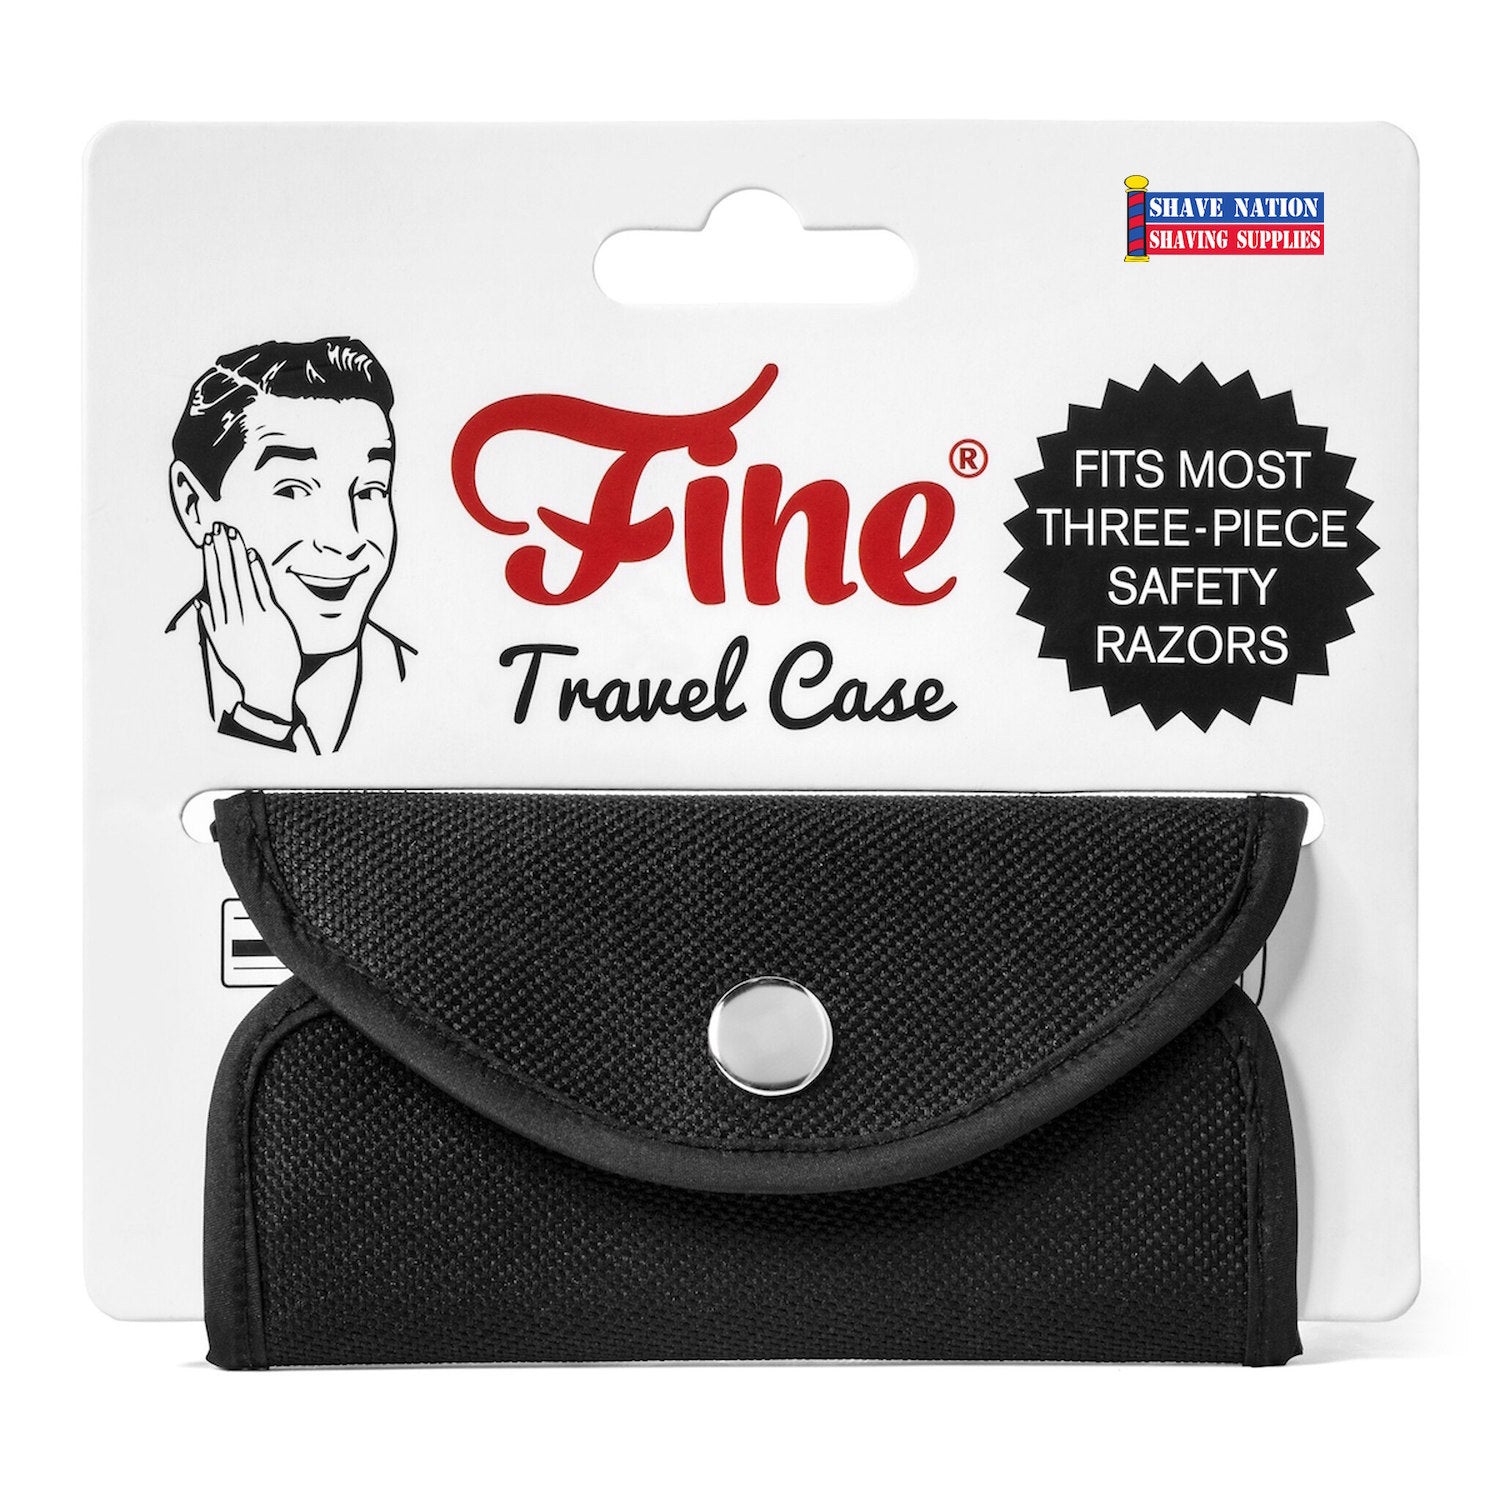 The 100mL Travel Pouch